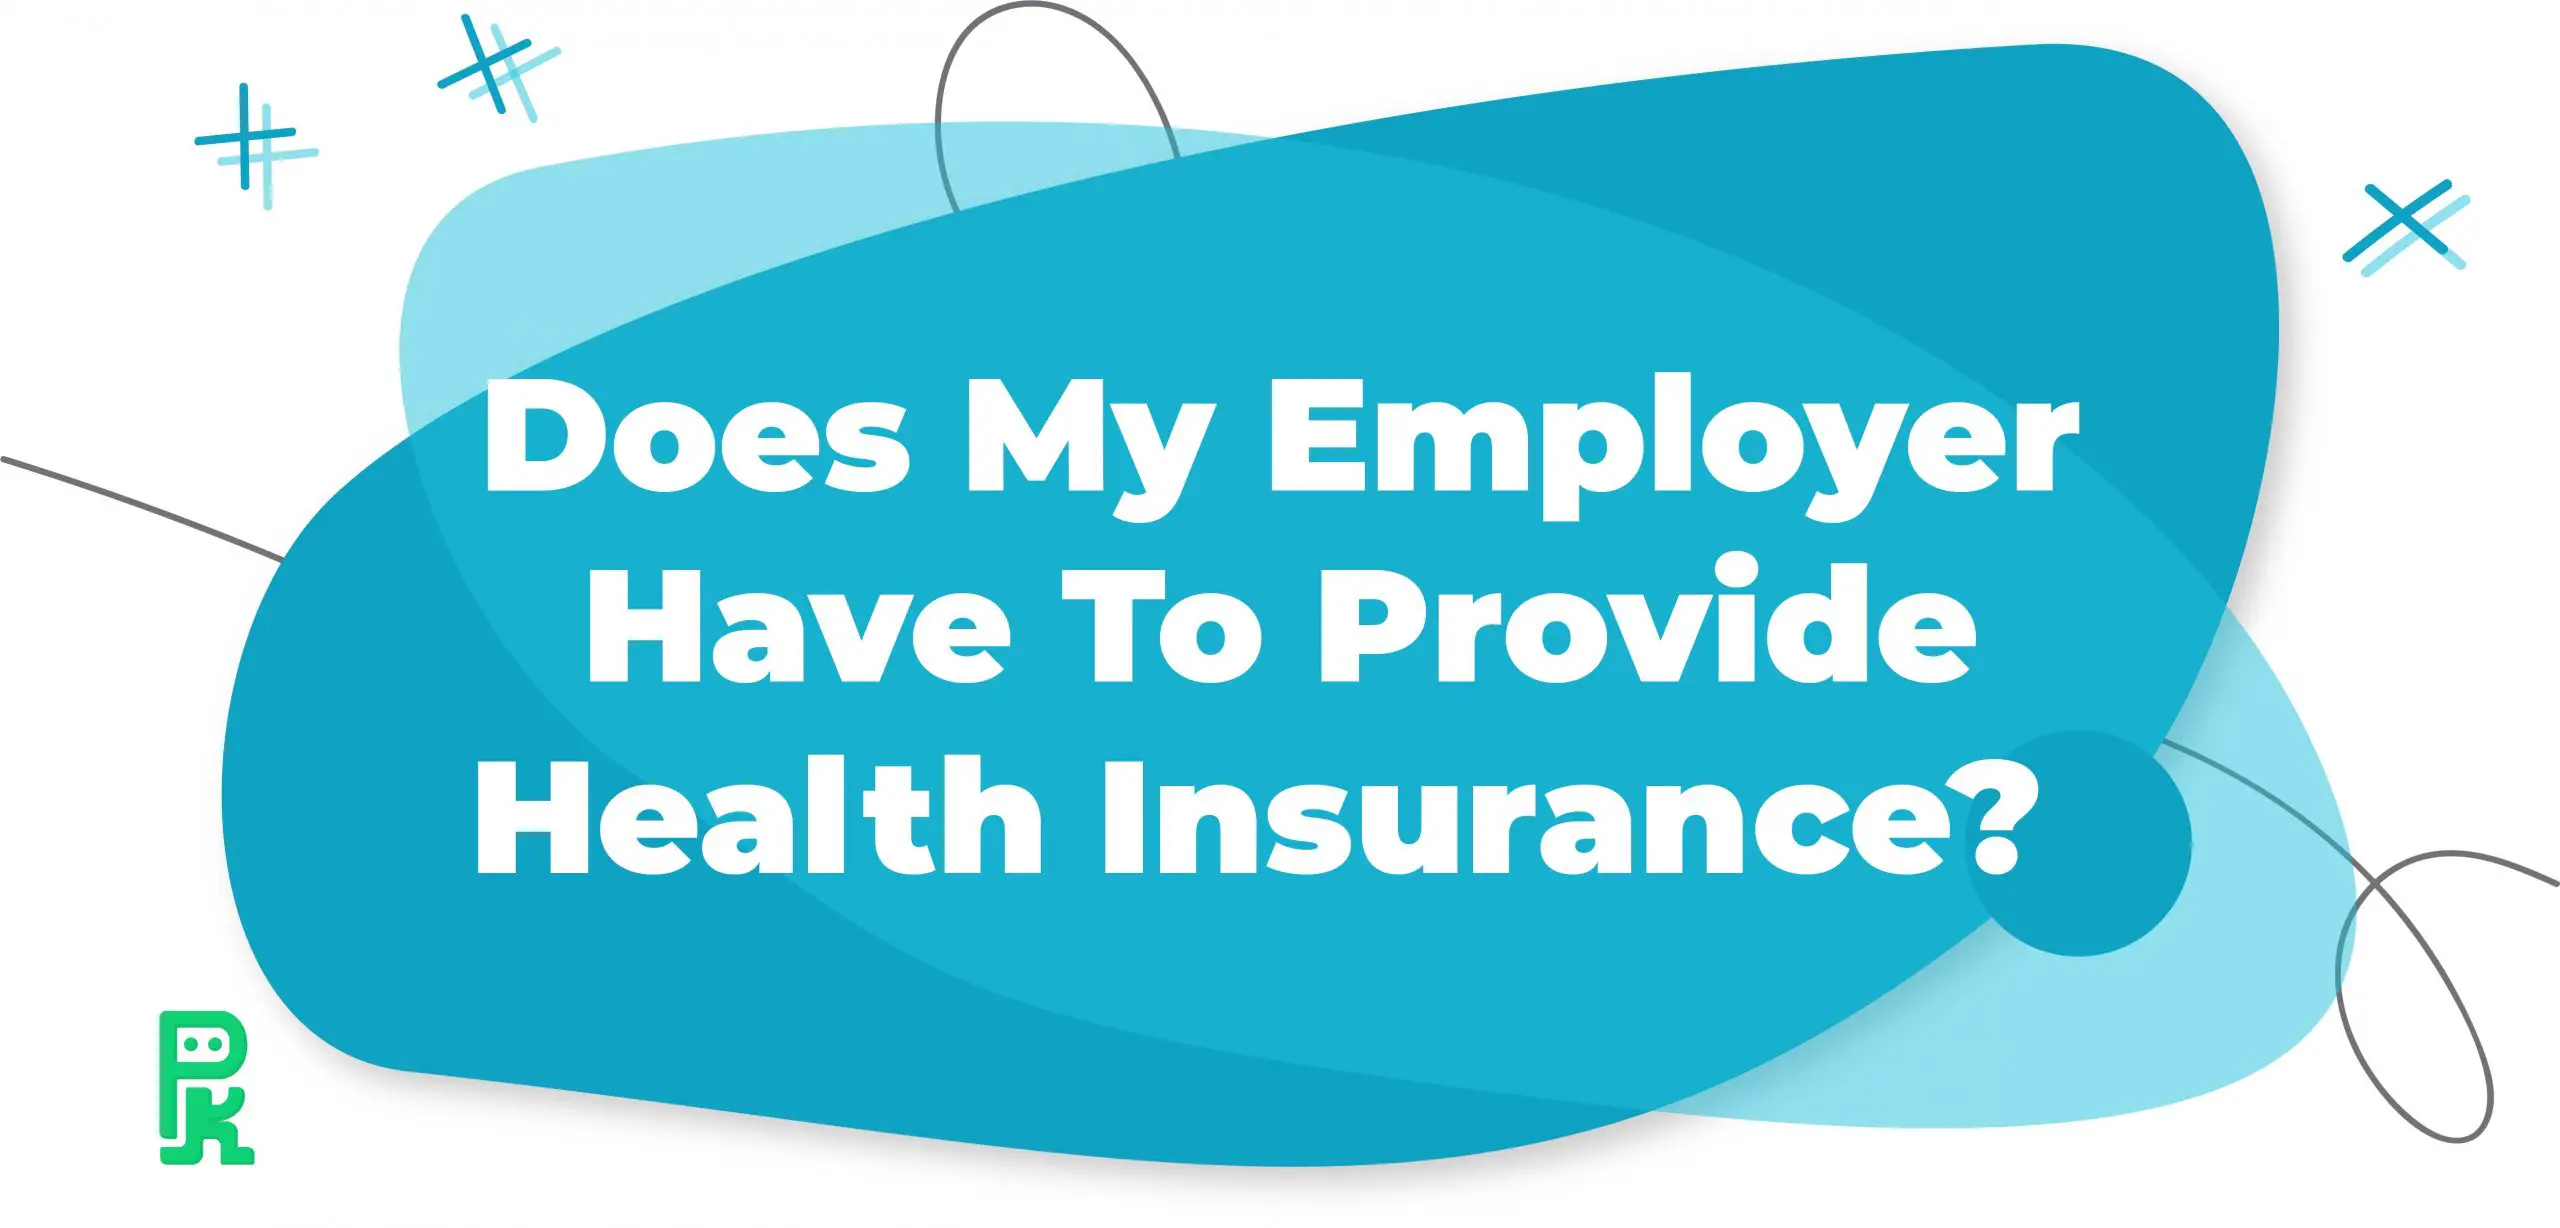 Does My Employer Have to Provide Health Insurance?